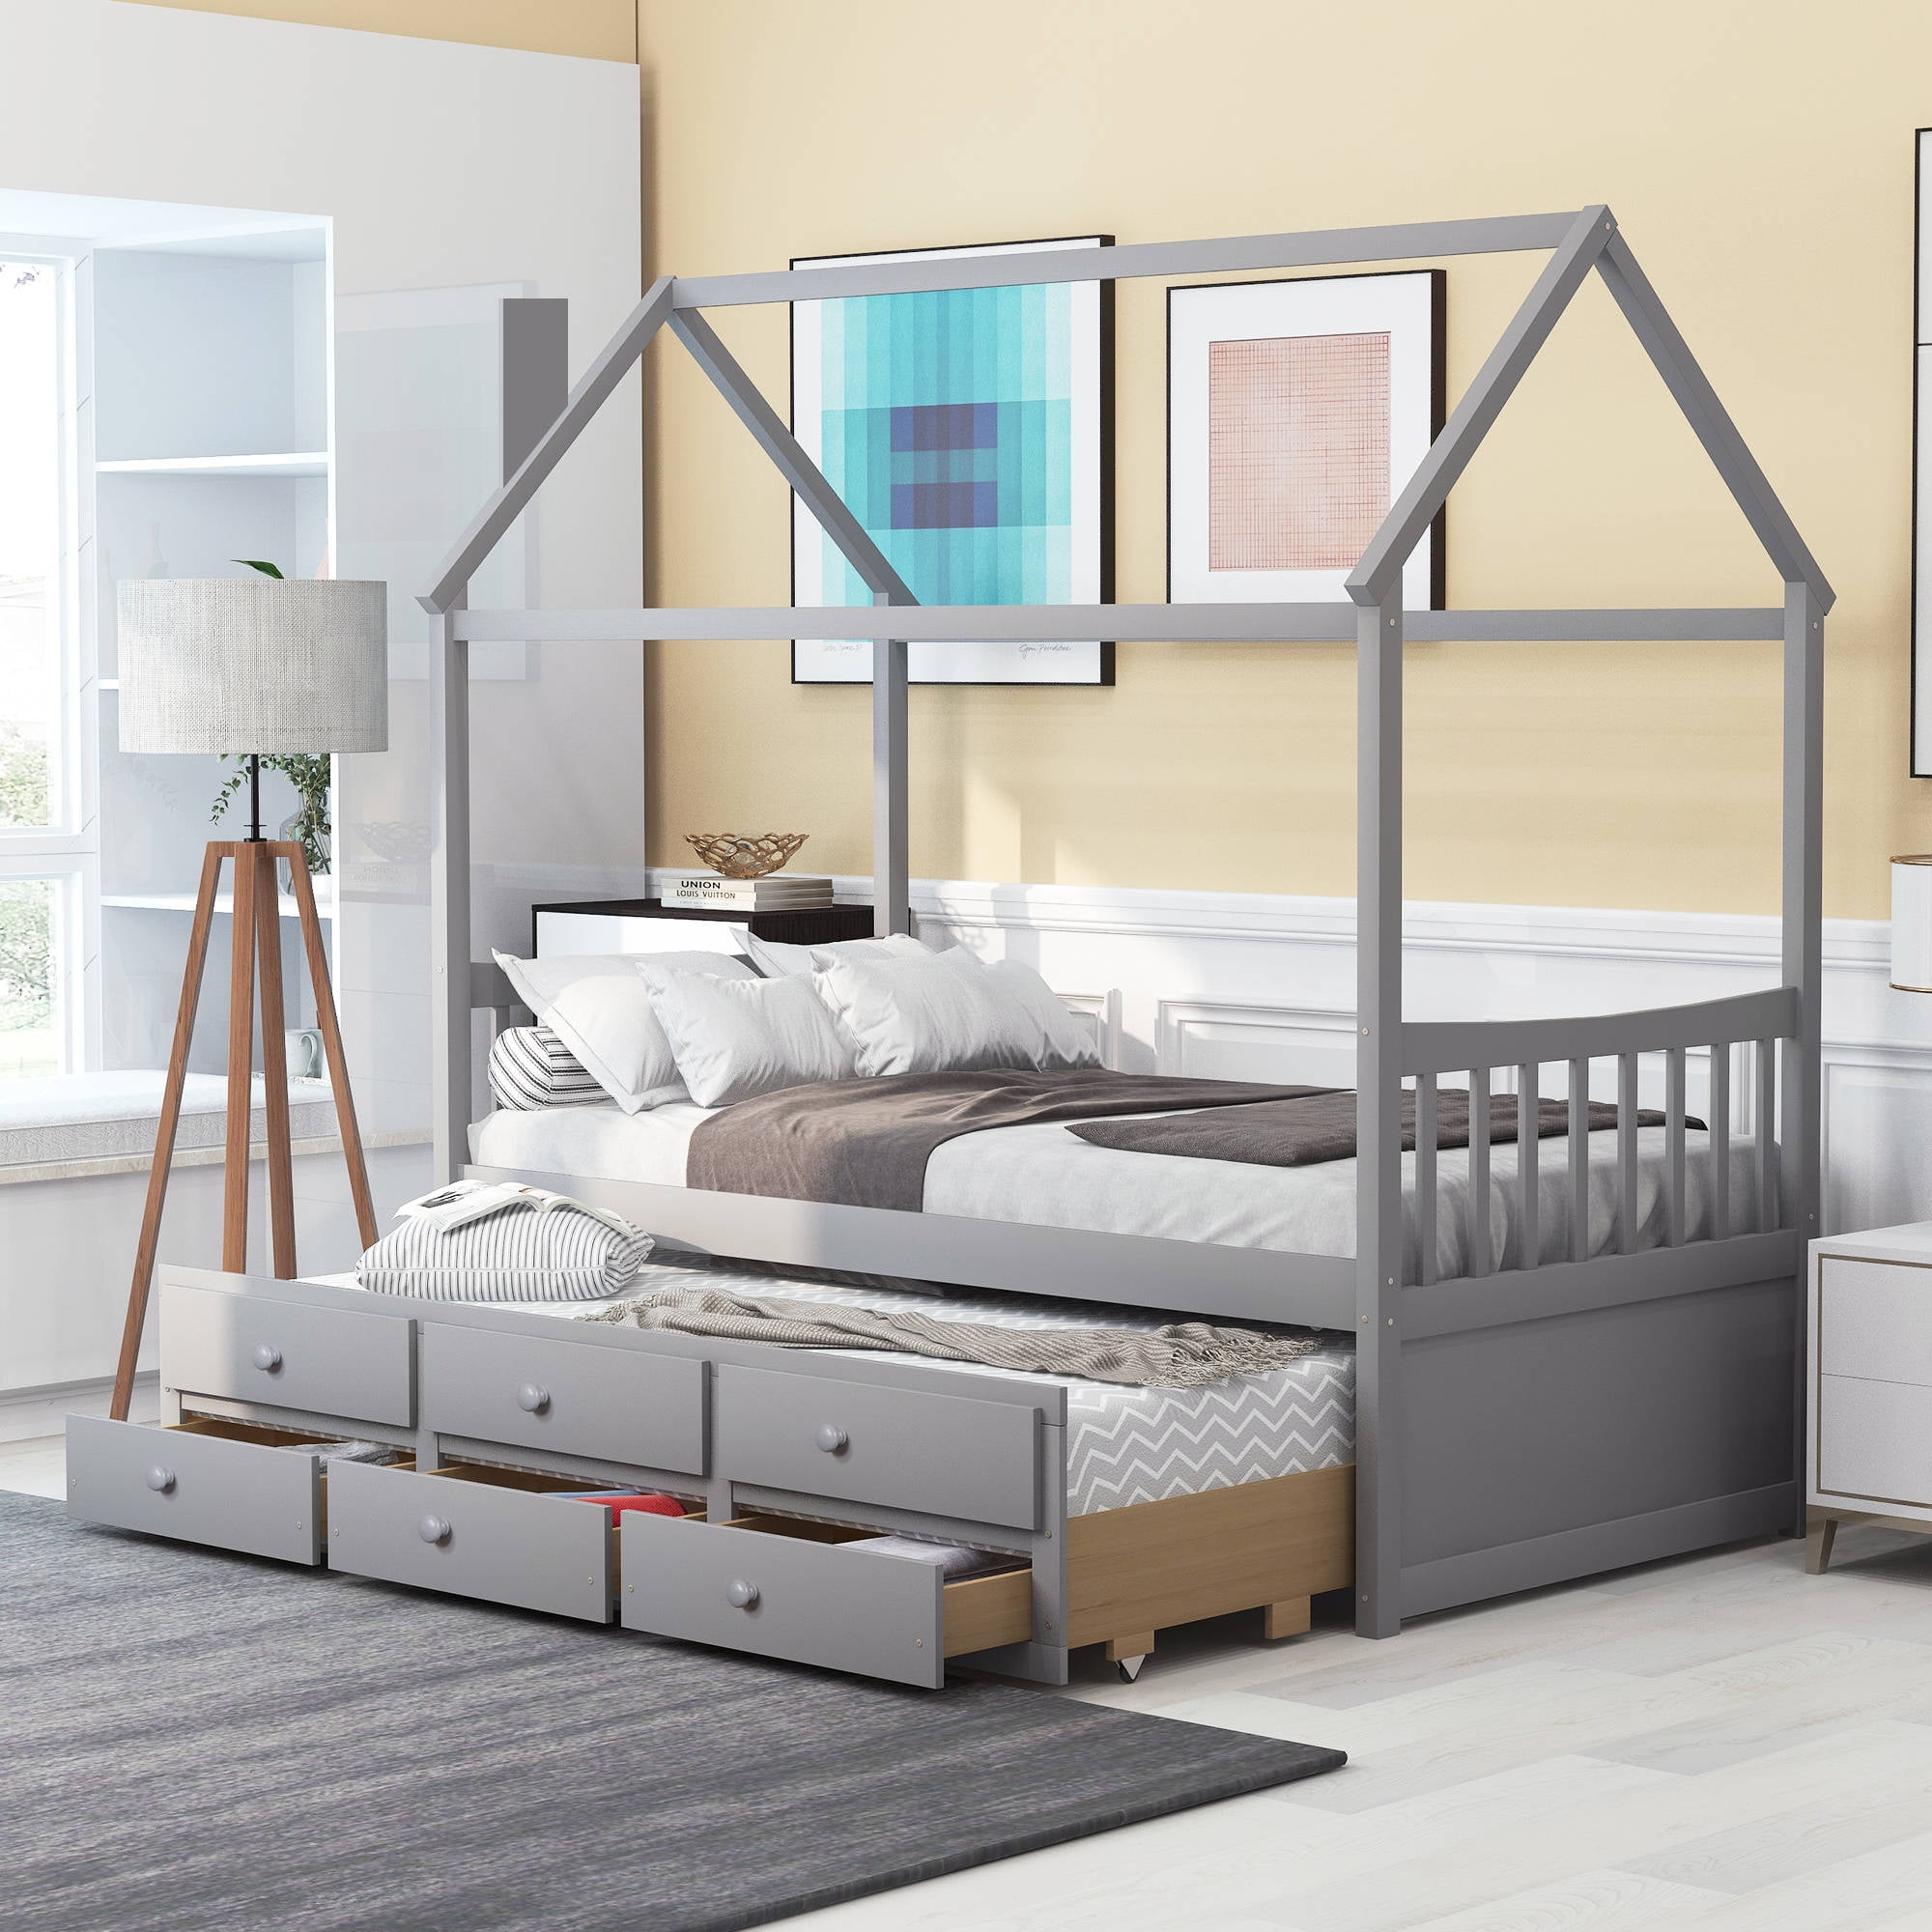 Twin Size House Bed with Trundle and 3 Storage Drawers, Twin Captain's  Beds, Wooden Storage Daybed Frame, House Shape Wooden Bed Frame Bedroom  Furniture, Can be Decorated,for Teens Boys Girls,Gray 